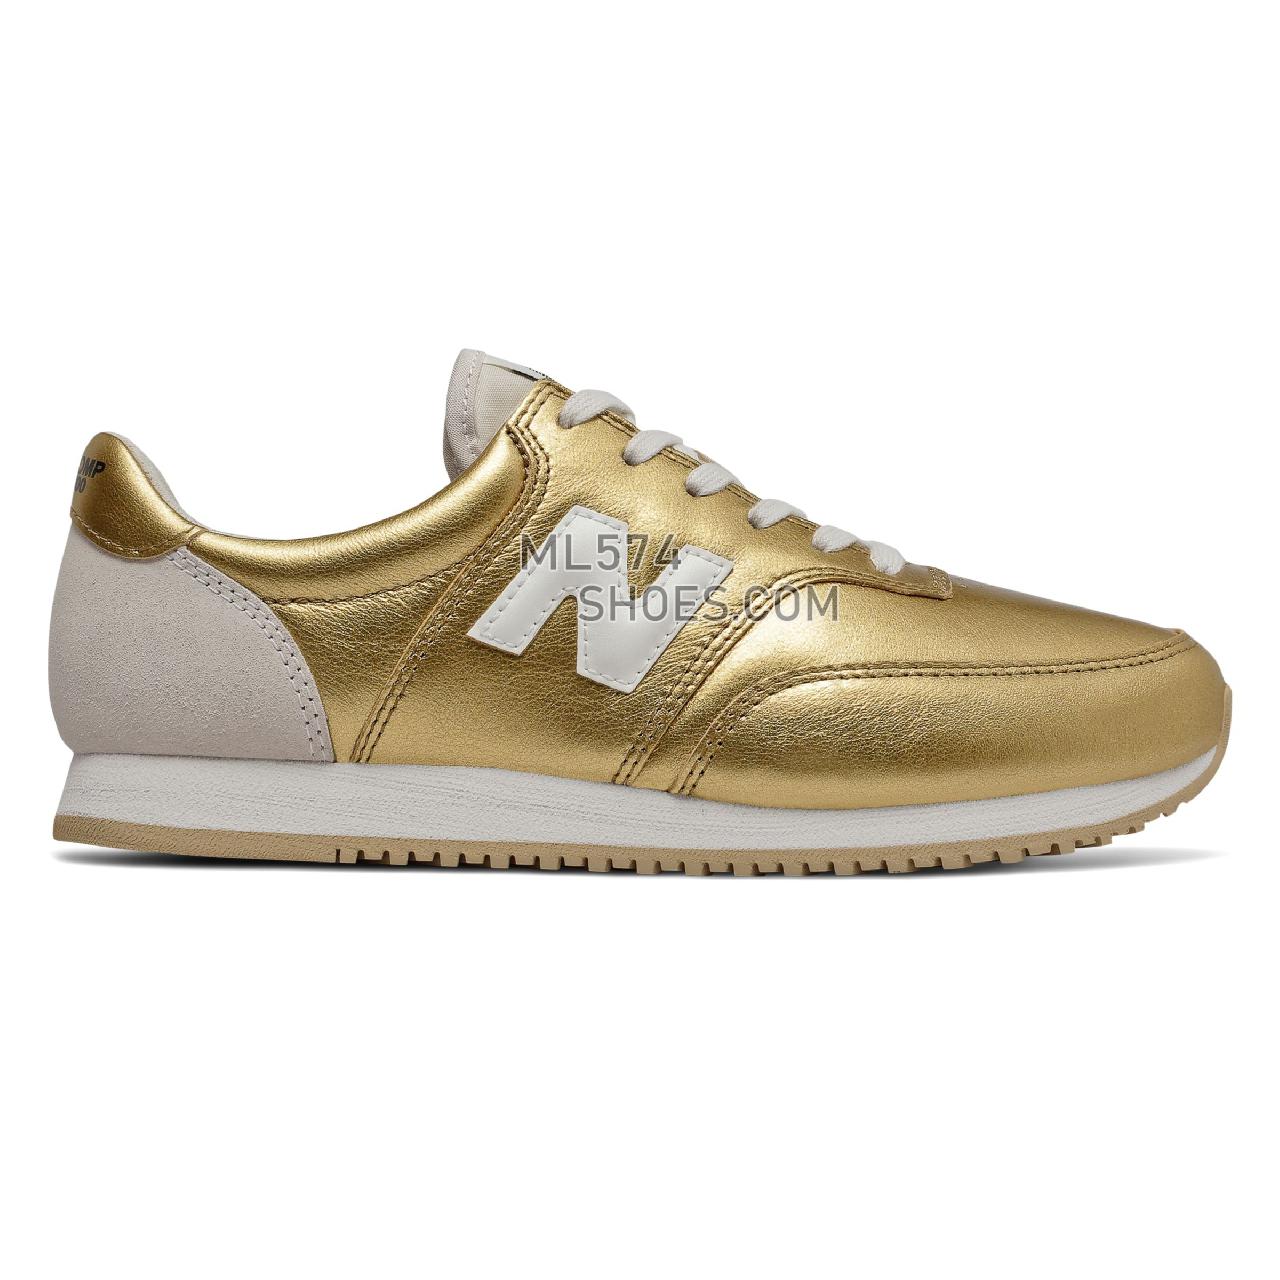 New Balance COMP 100 - Women's Whats Trending - Gold with Incense - WLC100AT